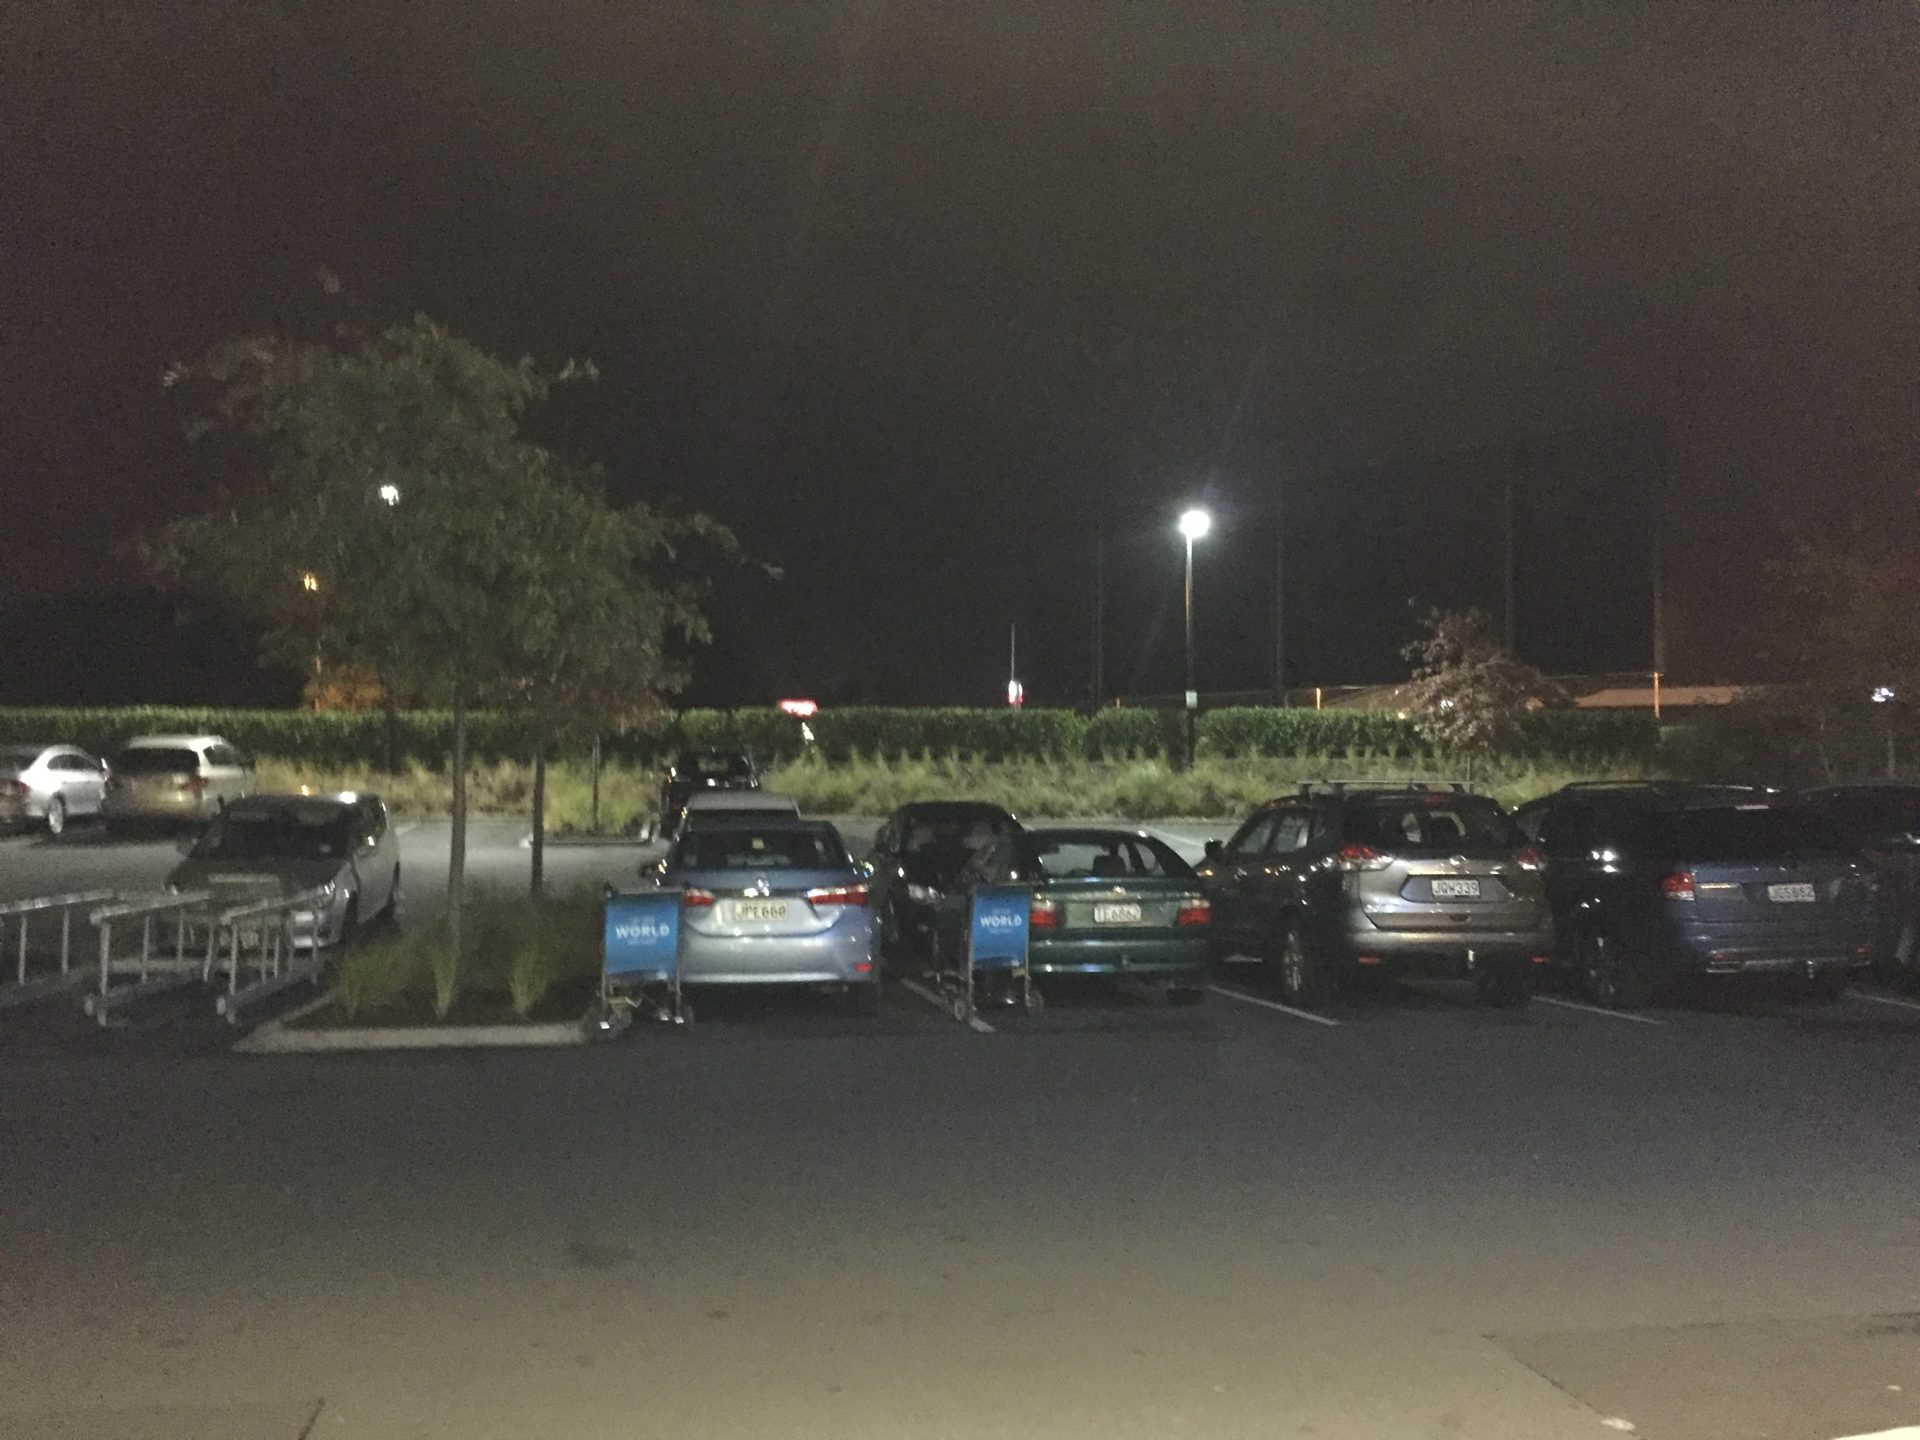 a group of cars in a parking lot at night